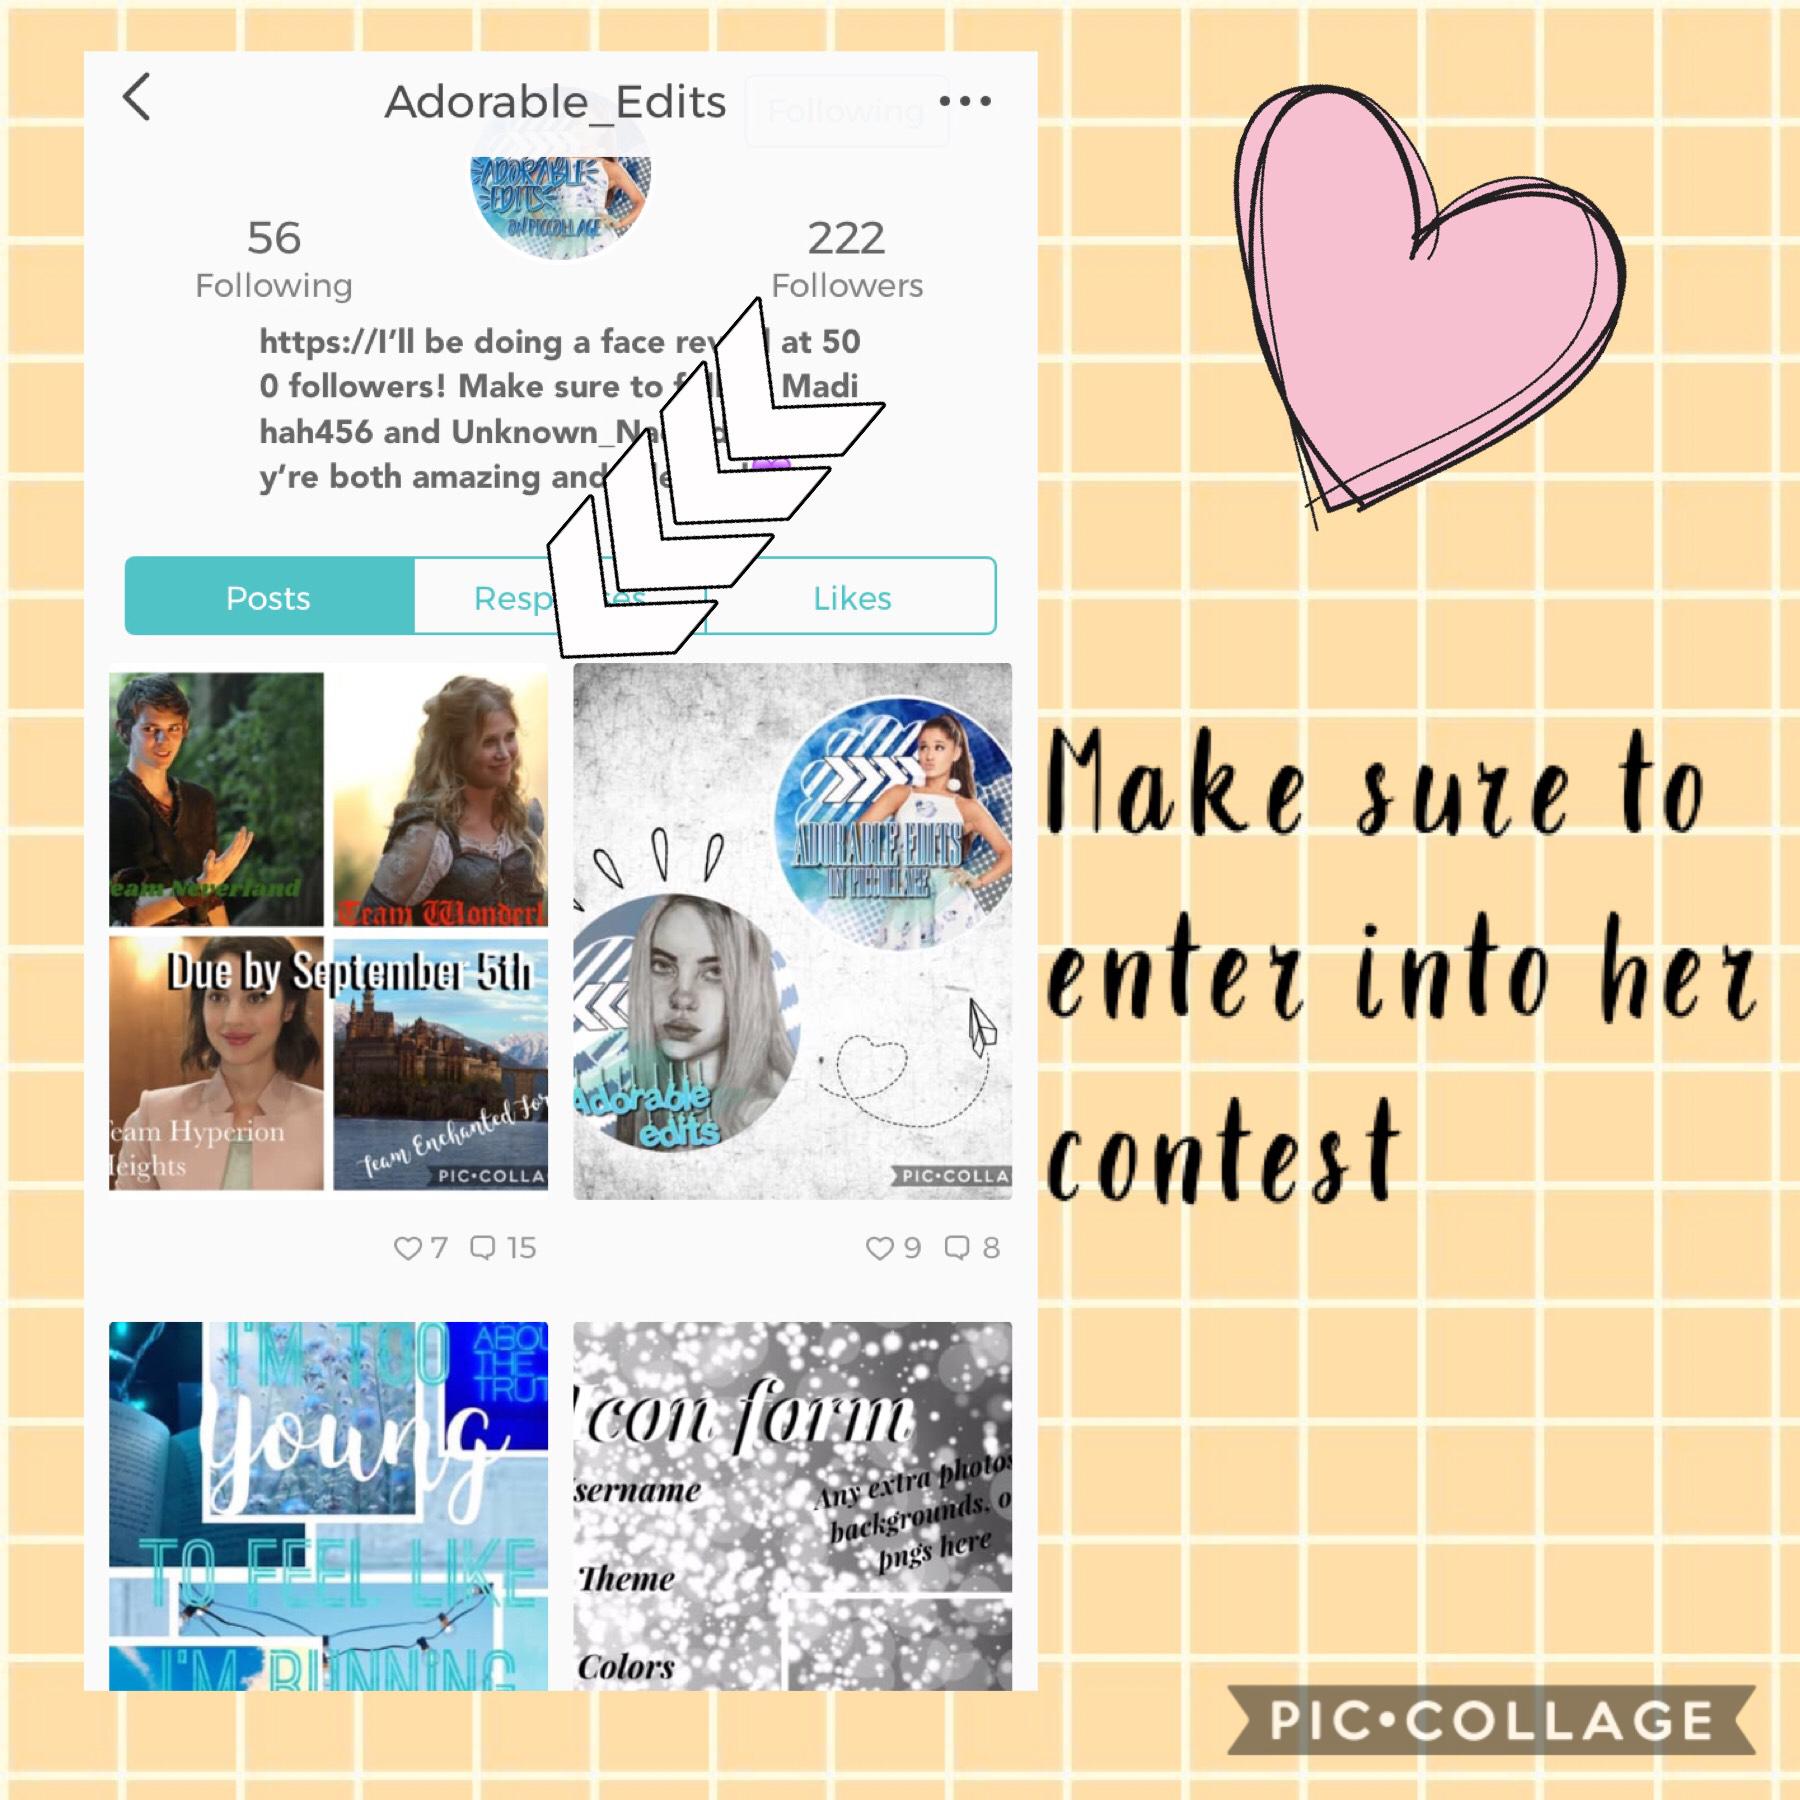 Please go enter into her contest!! She’s the best!